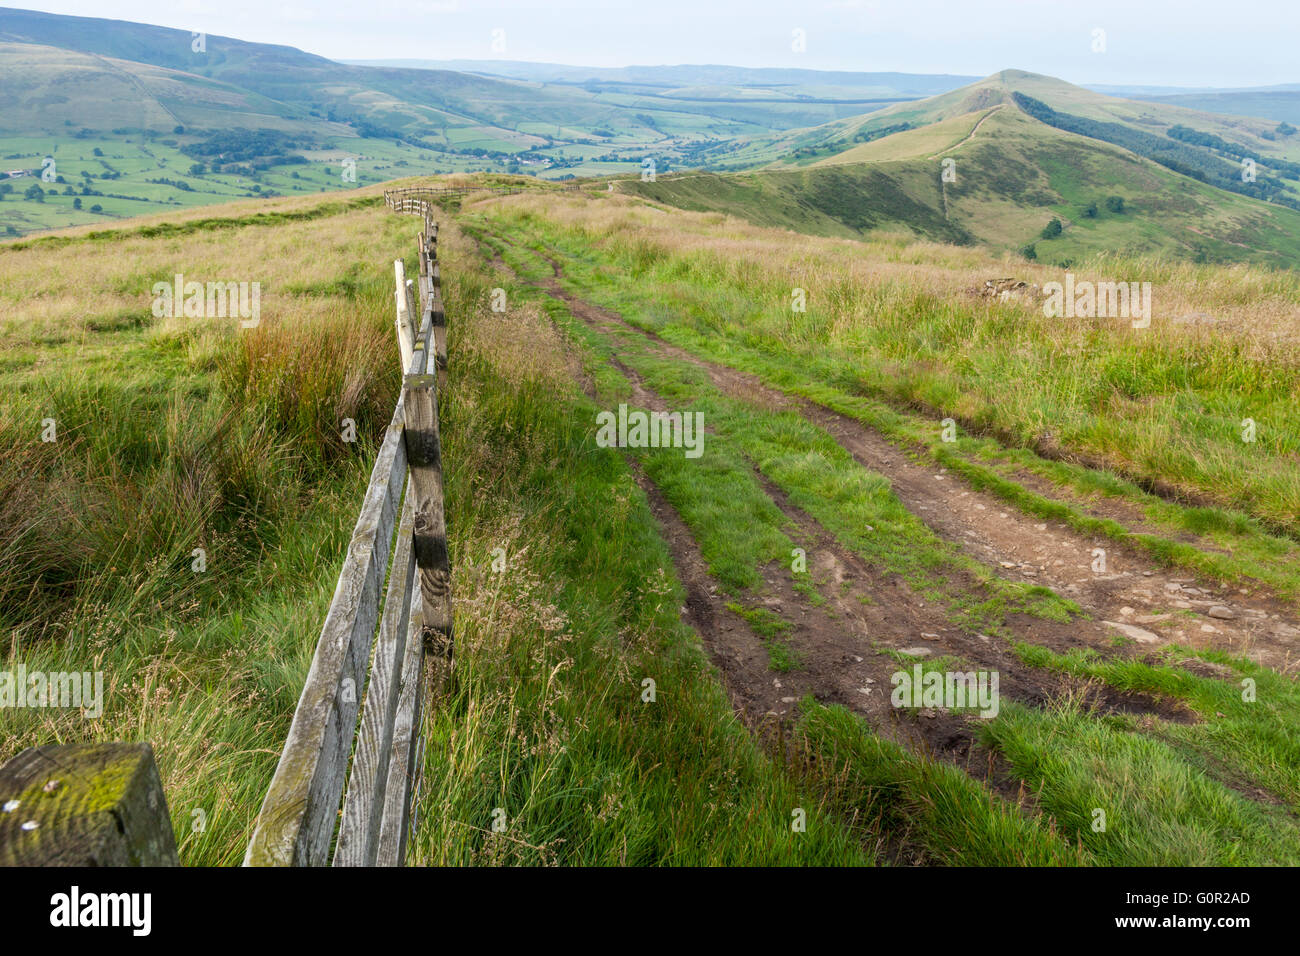 The Great Ridge with The Vale of Edale to the left, Derbyshire, Peak District, England, UK. Stock Photo